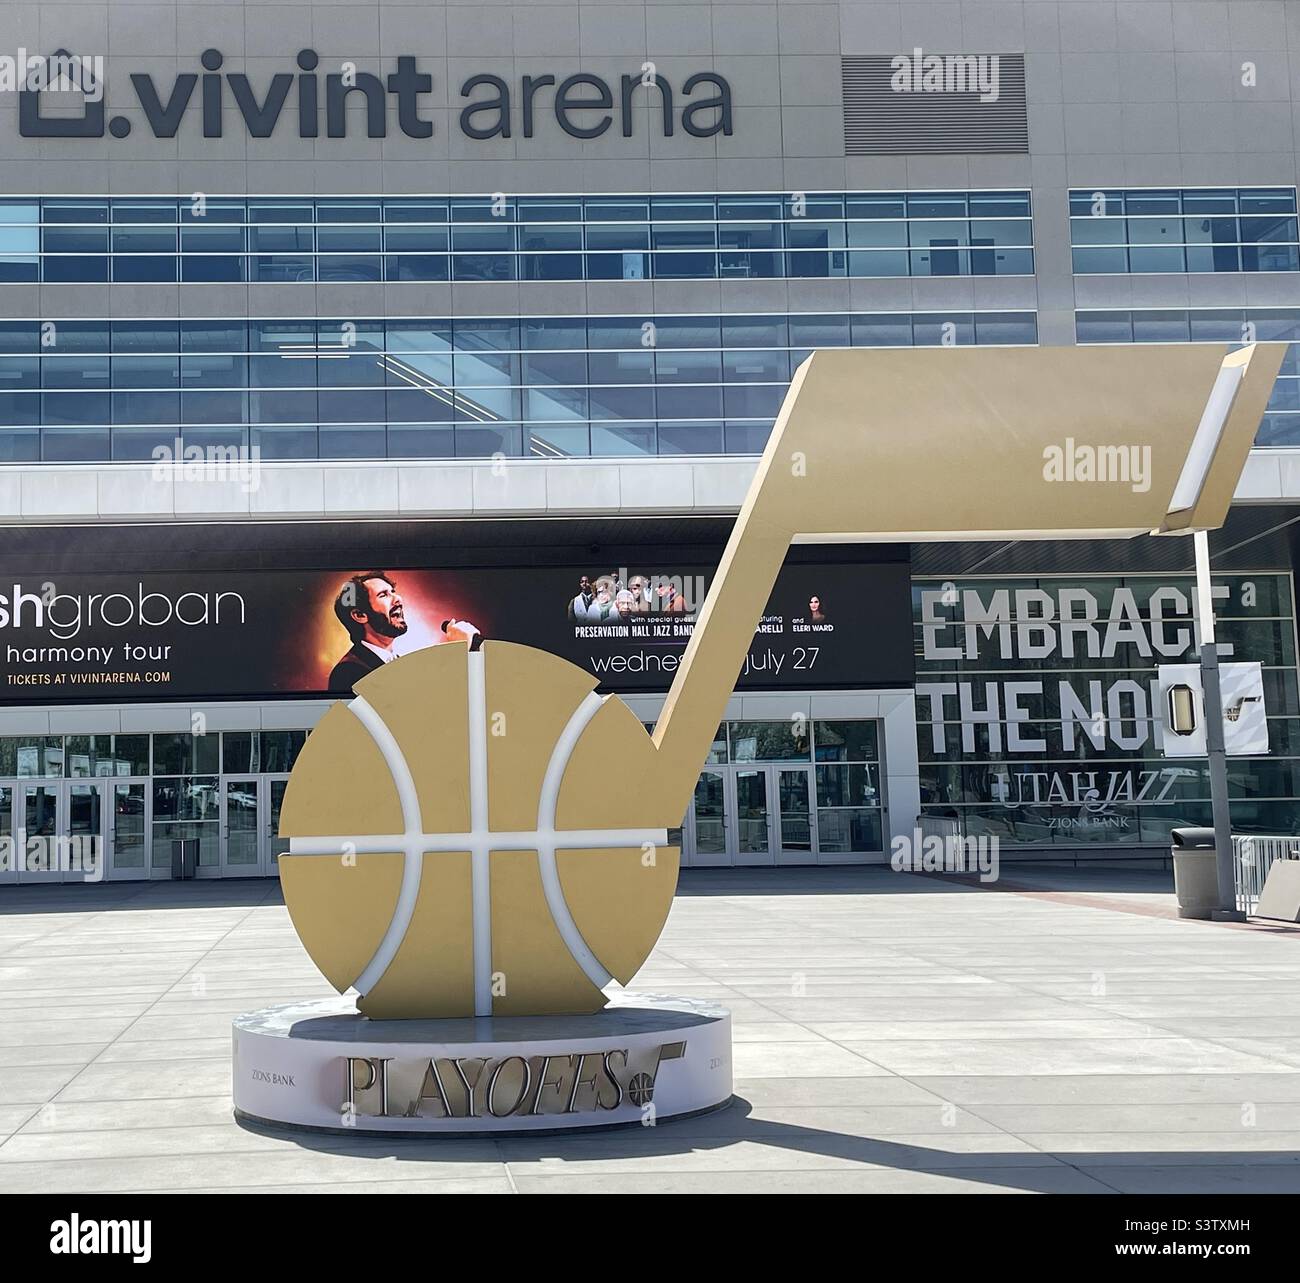 Large Utah Jazz basketball logo sets in front of the Vivint Arena, the home of The Utah Jazz in SLC, Utah, USA. Stock Photo